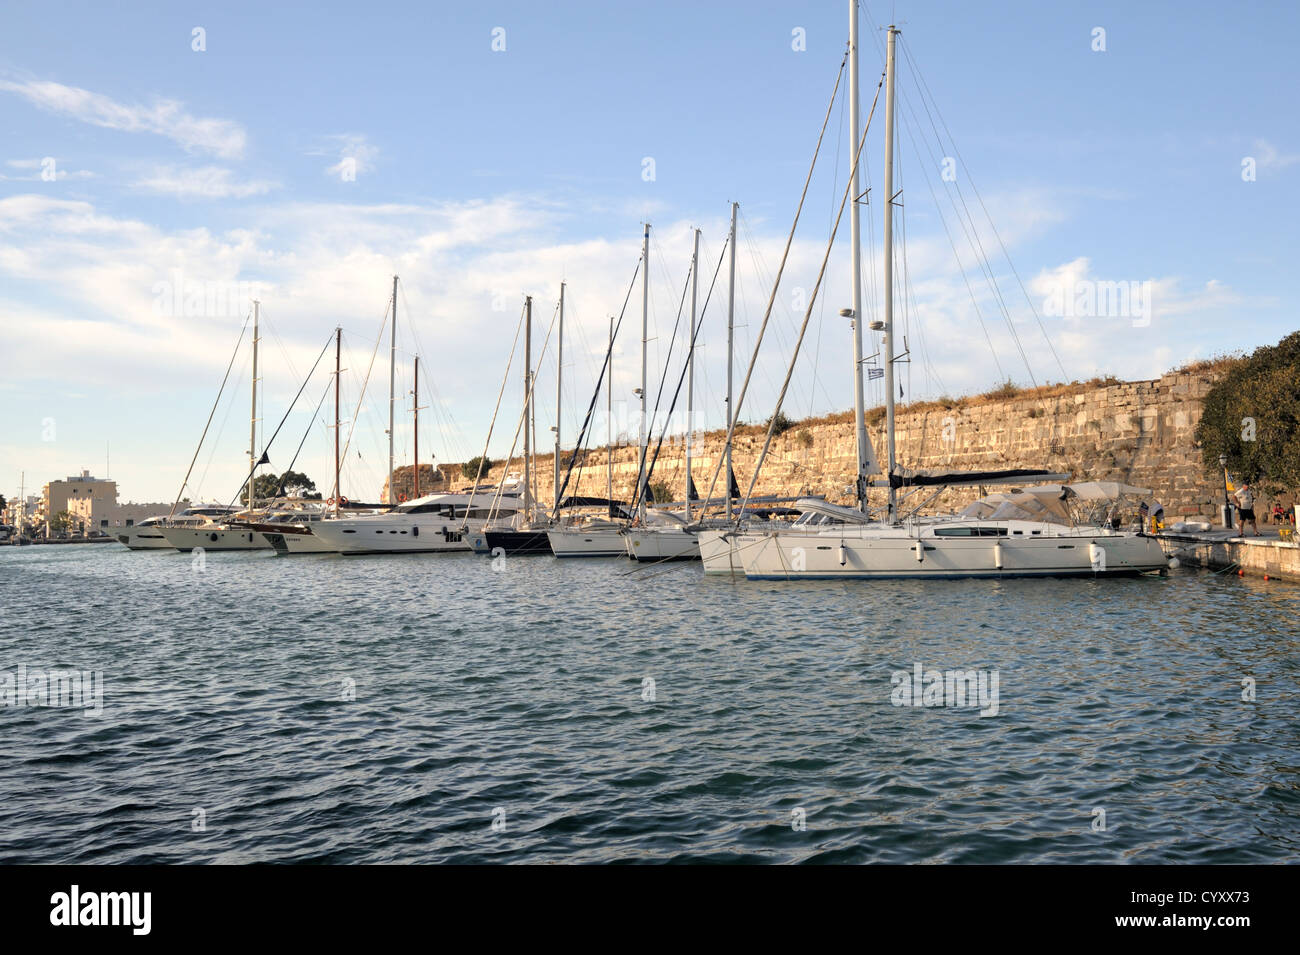 Supper yachts in harbour of Kos town, island of Kos, Greece Stock Photo